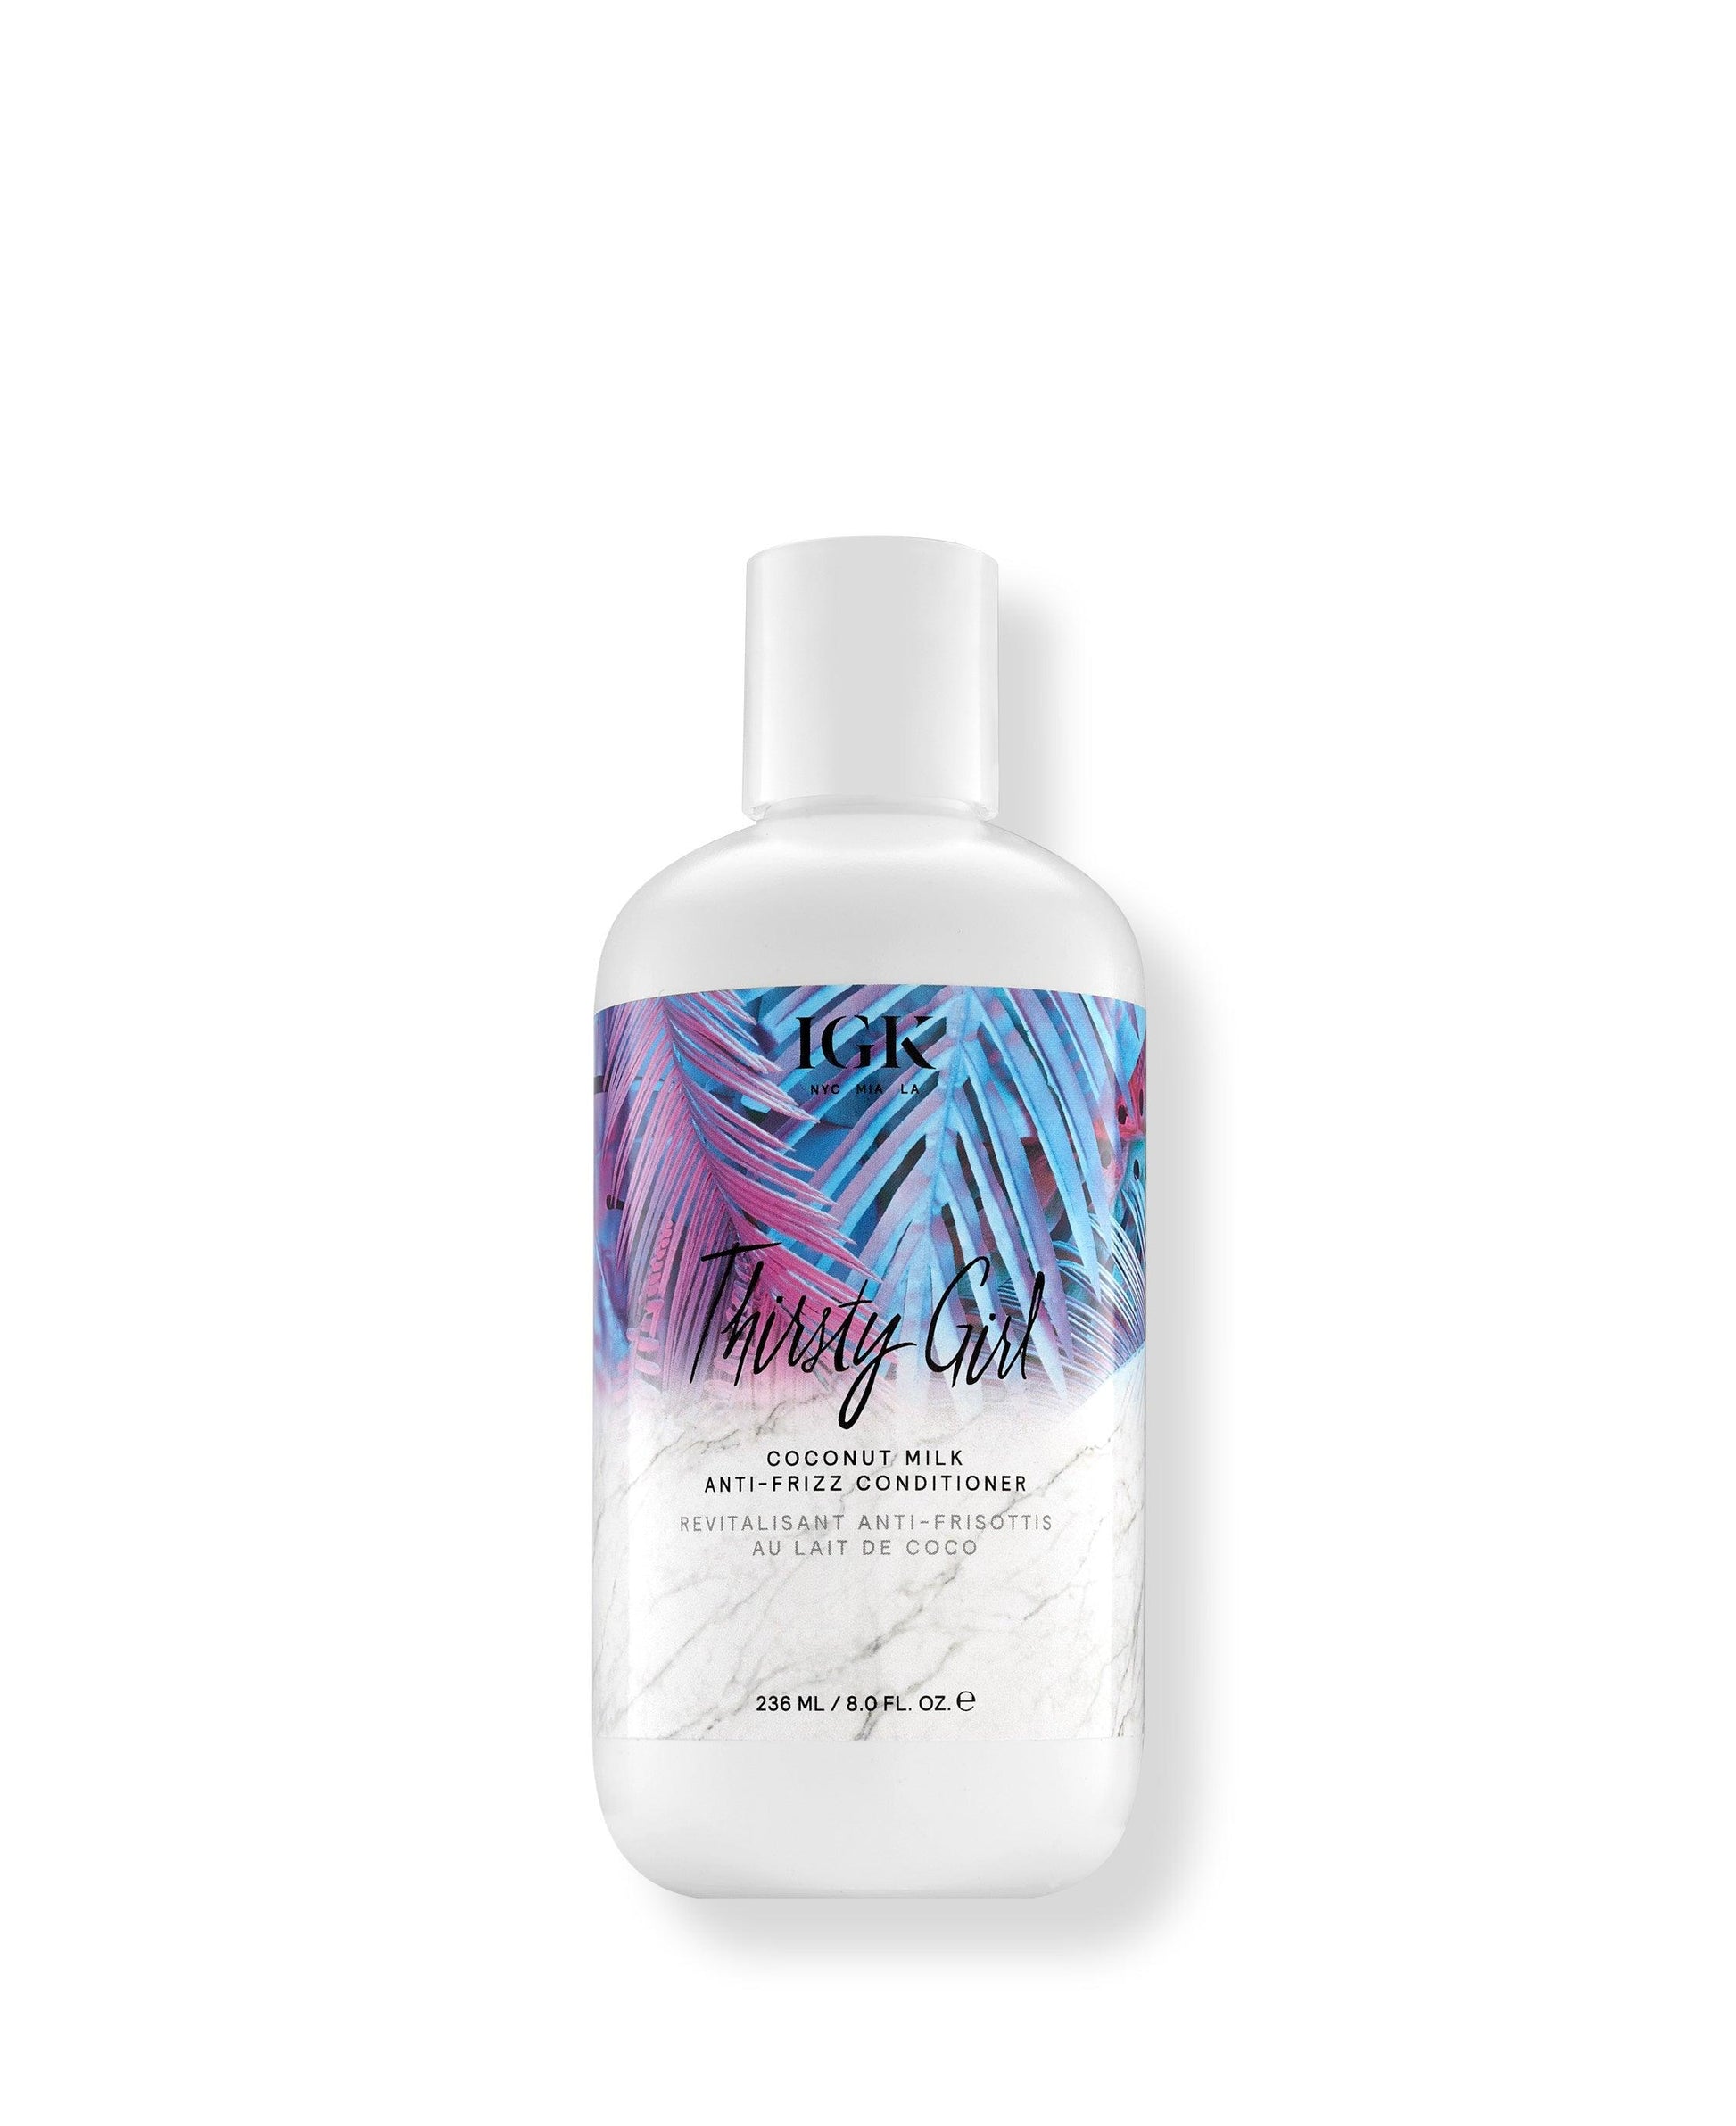 THIRSTY GIRL Anti-Frizz Conditioner - The Coloroom 